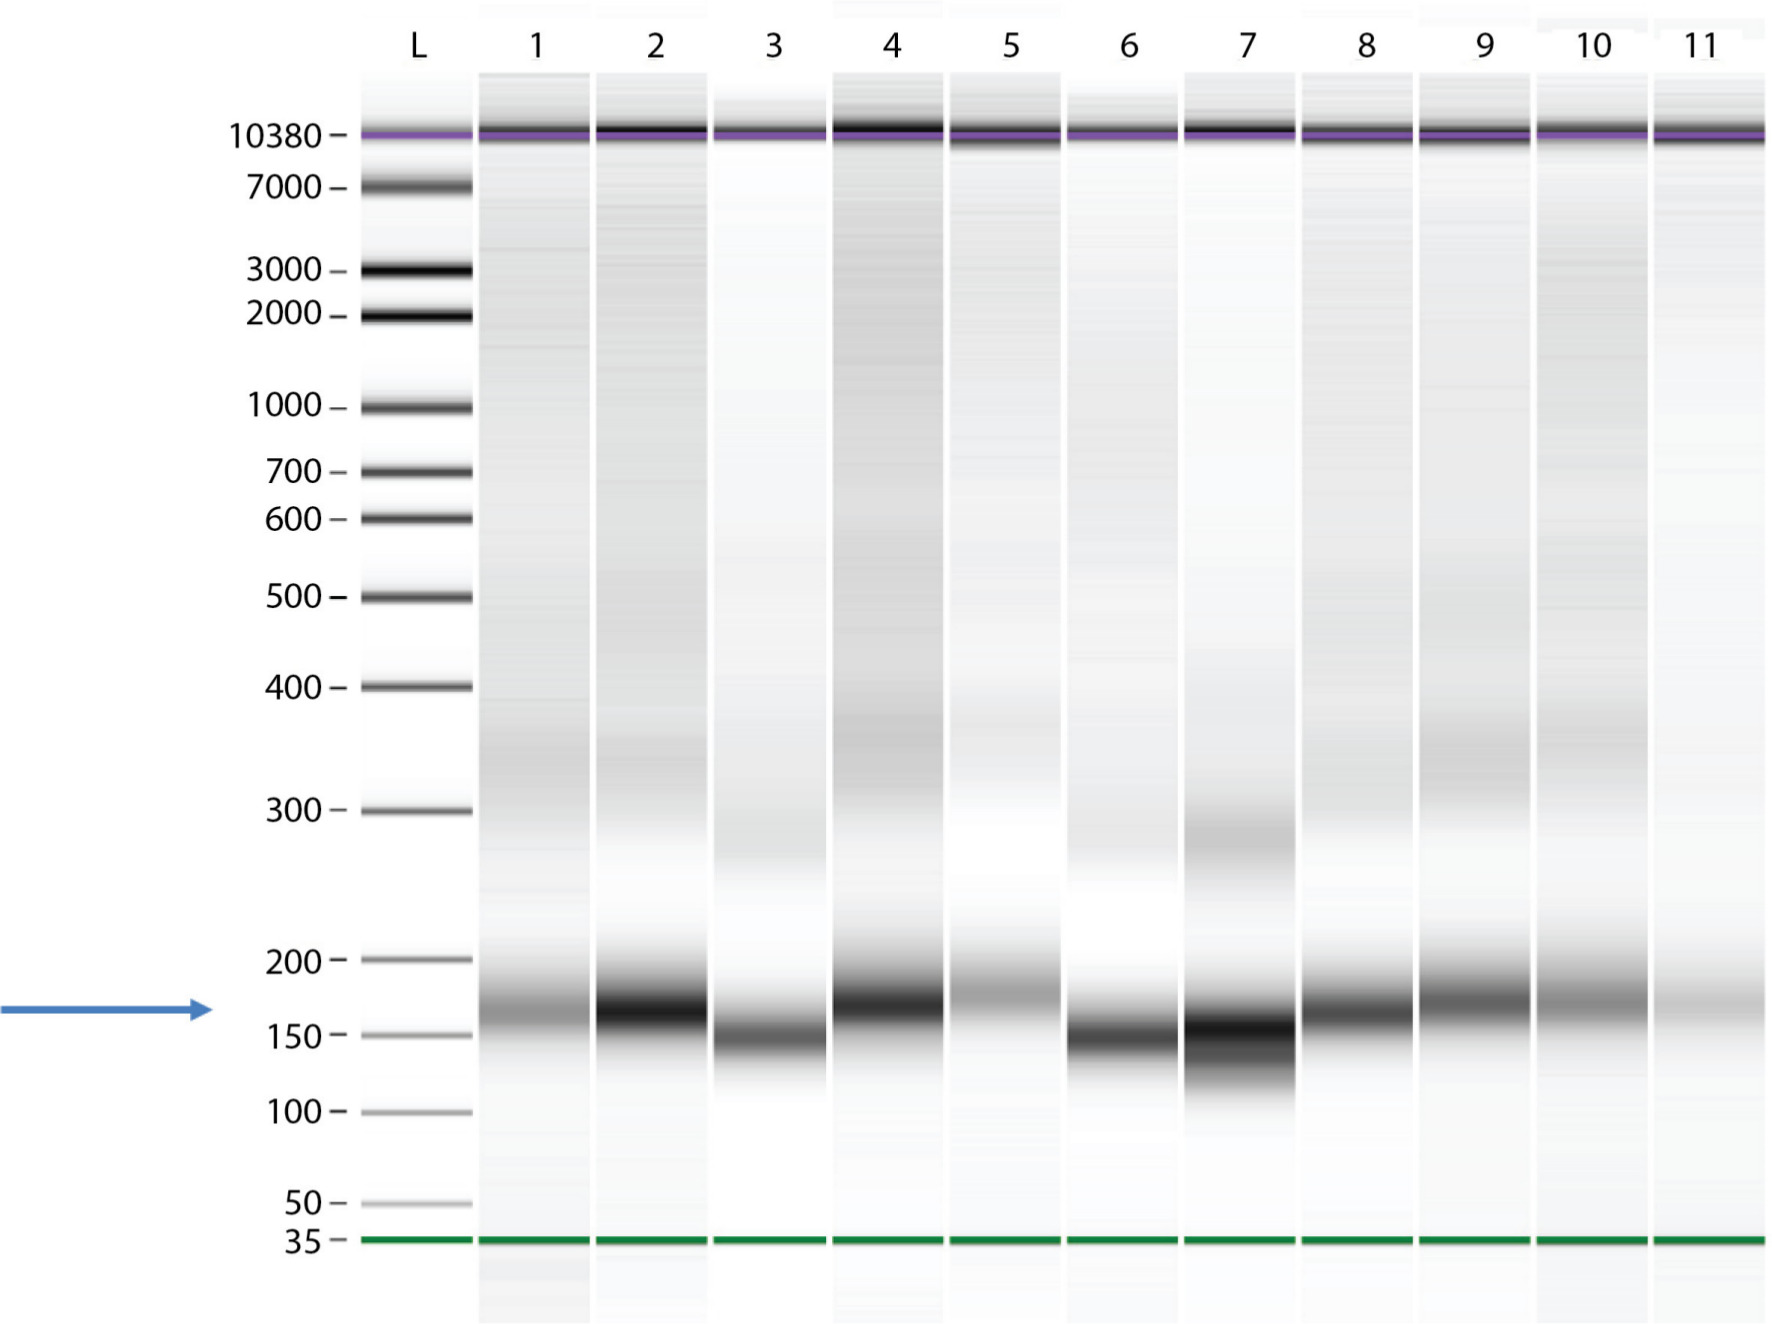 Fig. 1 
            Cell-free DNA fragment size assessment by capillary electrophoresis. Lane L contains the molecular weight ladder; Lanes 1 to 11 contain extracted DNA samples for 11 individual cases. All samples tested contained signal peaks corresponding to DNA fragments of 140 bp to 200 bp, consistent with cell-free DNA (blue arrow). The purple lines indicate the upper marker (10,380 bp) while the green lines indicate the lower marker (35 bp).
          